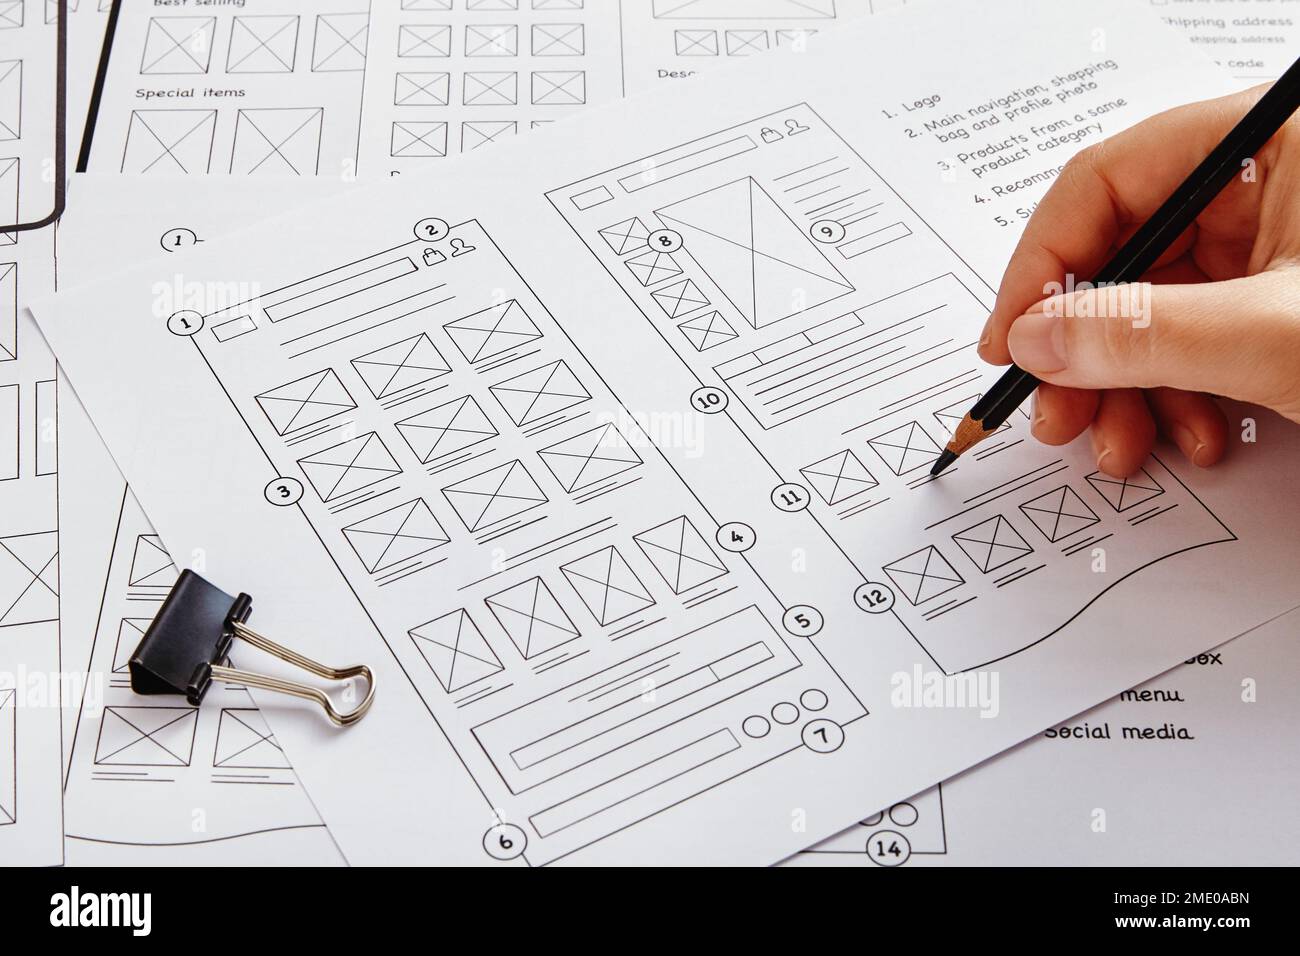 ux Graphic designer creative sketch planning application process  development prototype wireframe for web mobile phone  User experience  concept Stock Photo  Adobe Stock